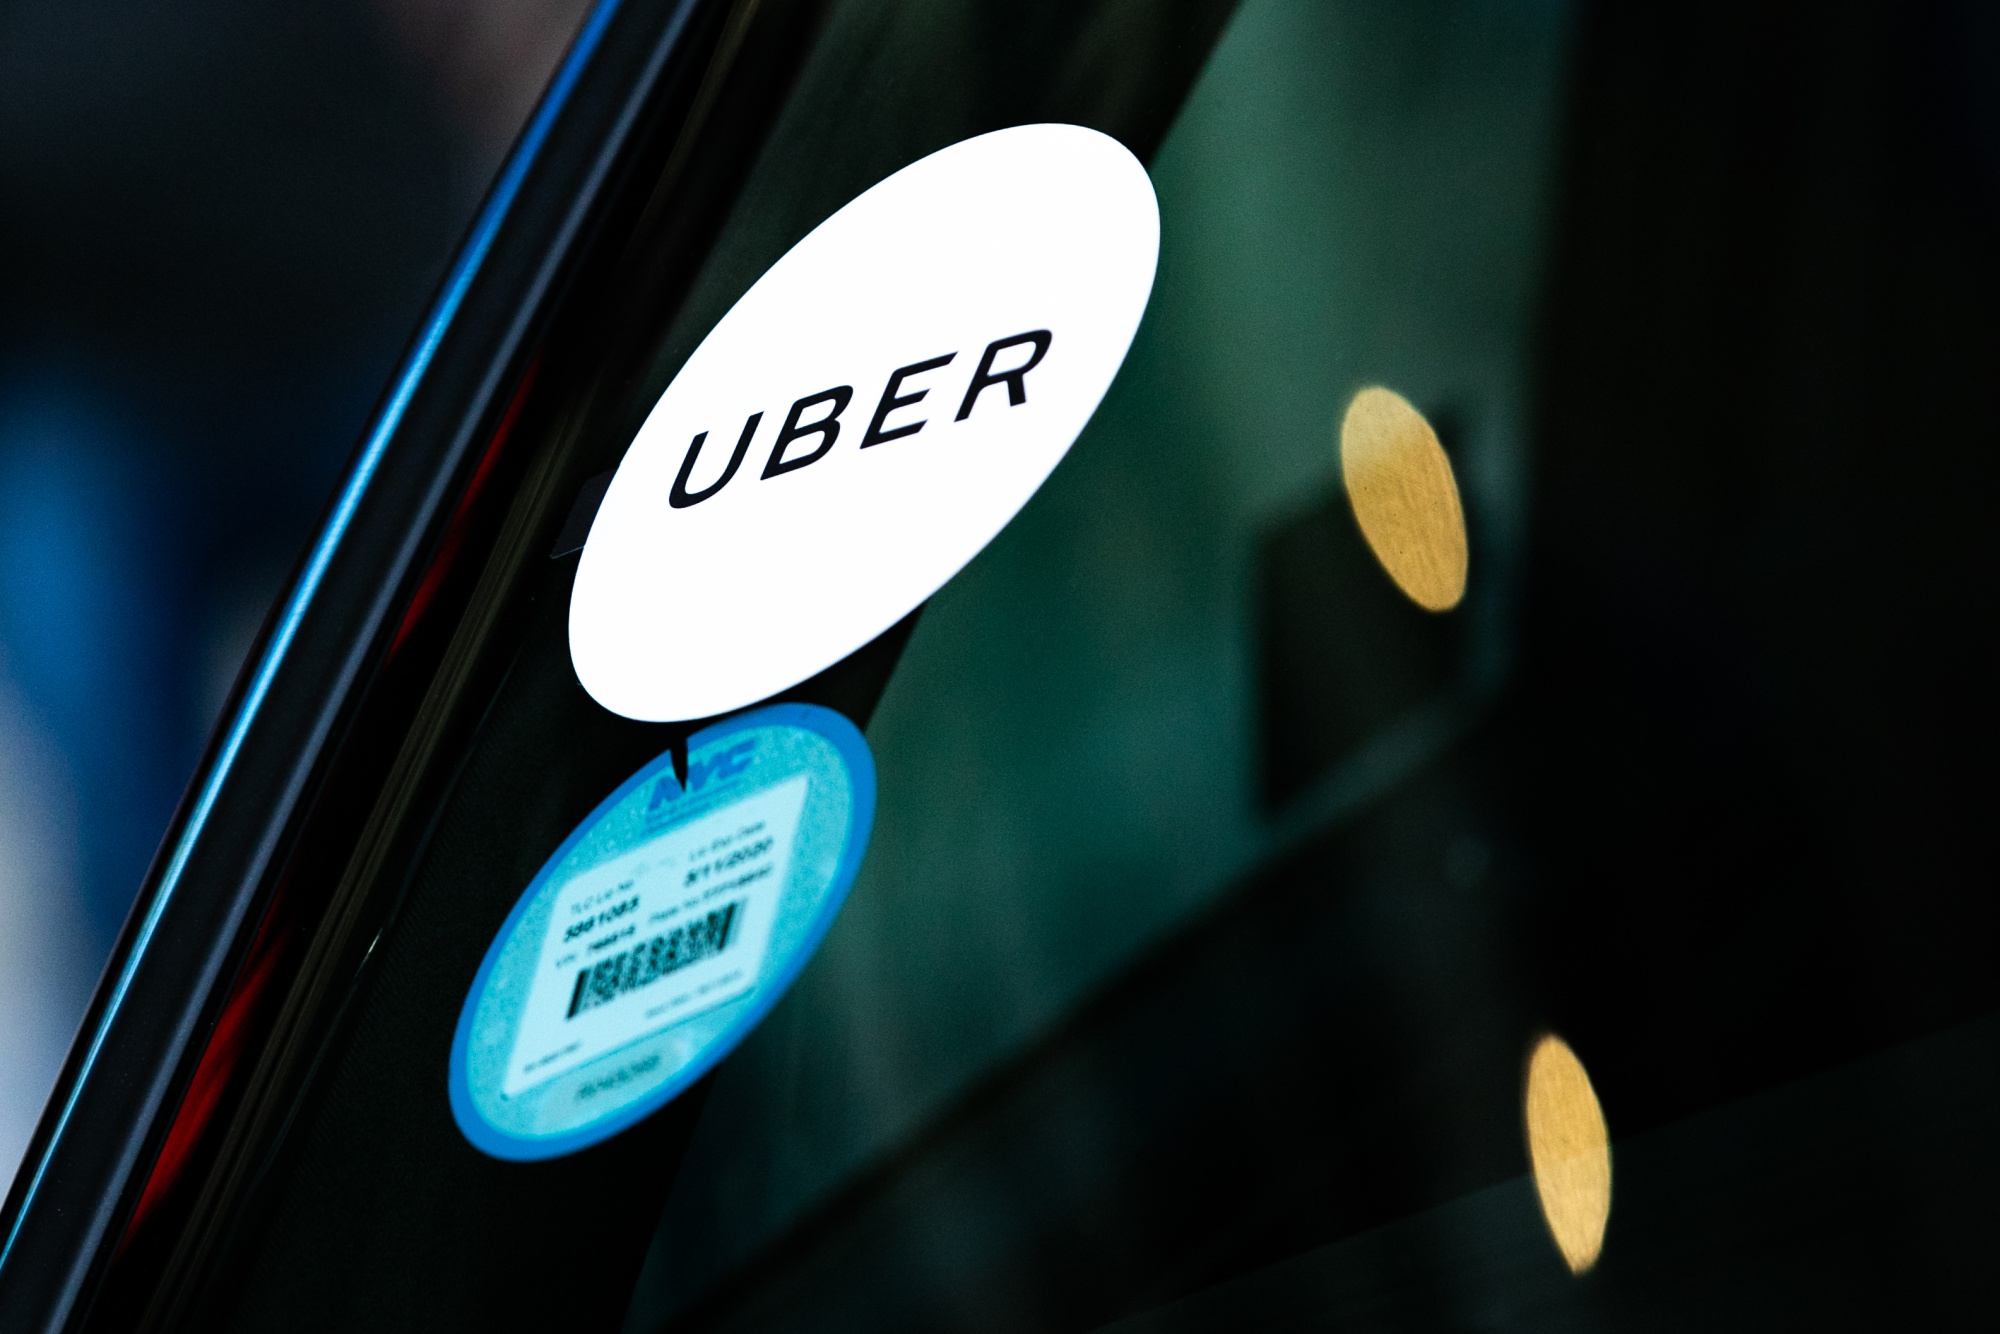 An Uber sticker is displayed on a vehicle in New York.